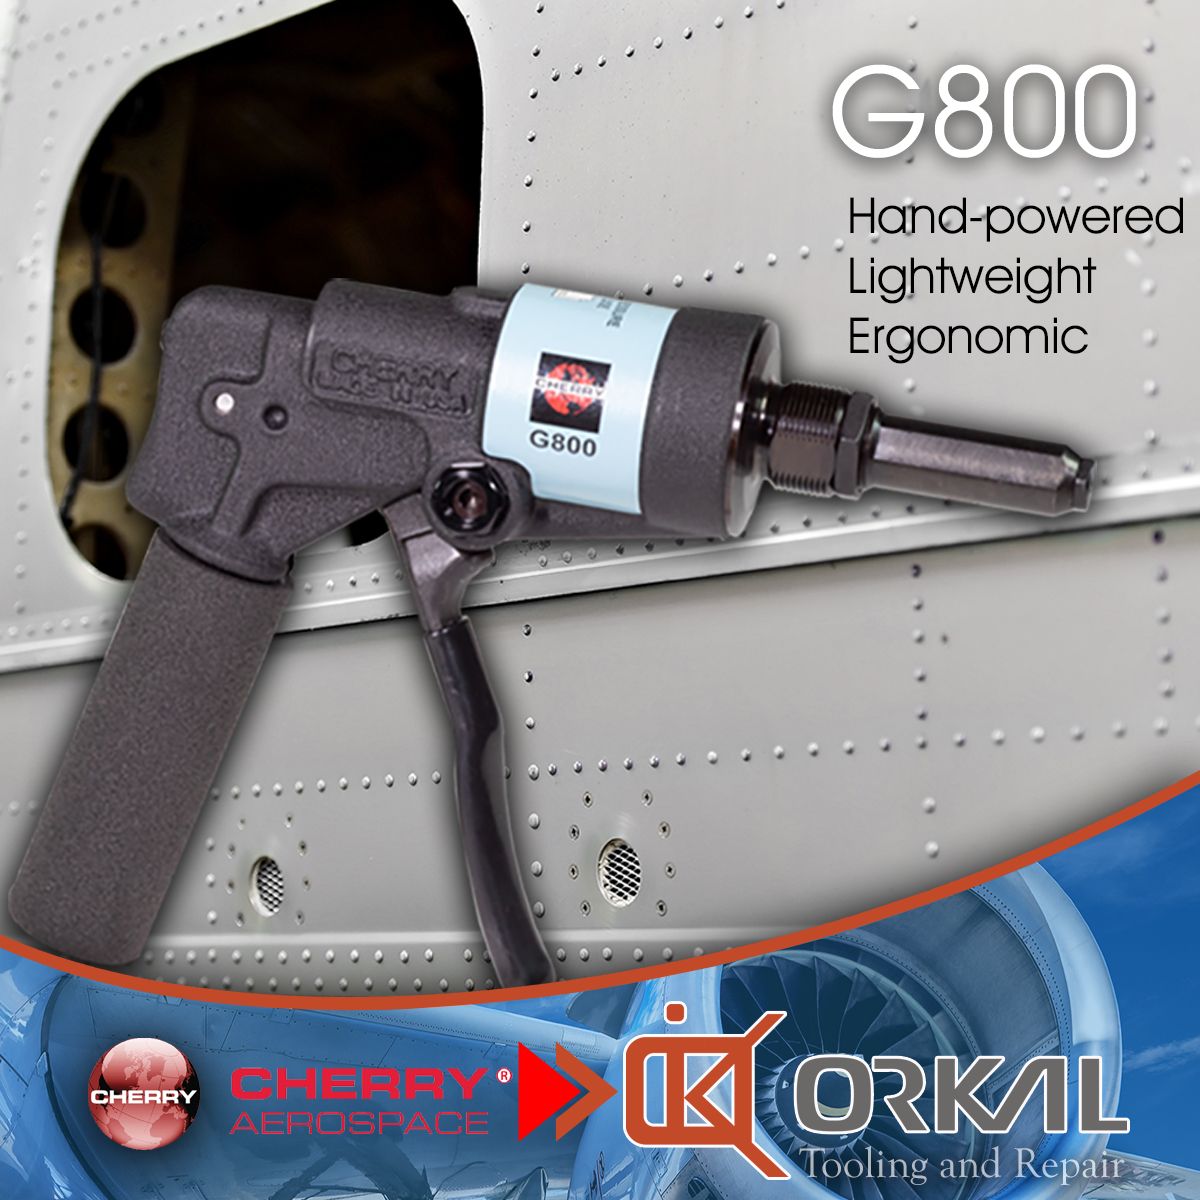 orkal, image of a hand-powered g800 tool by cherry aerospace near an aircraft fuselage. lightweight, ergonomic, efficient. orkal industries logo—reliable service, endorsed by auto draft.